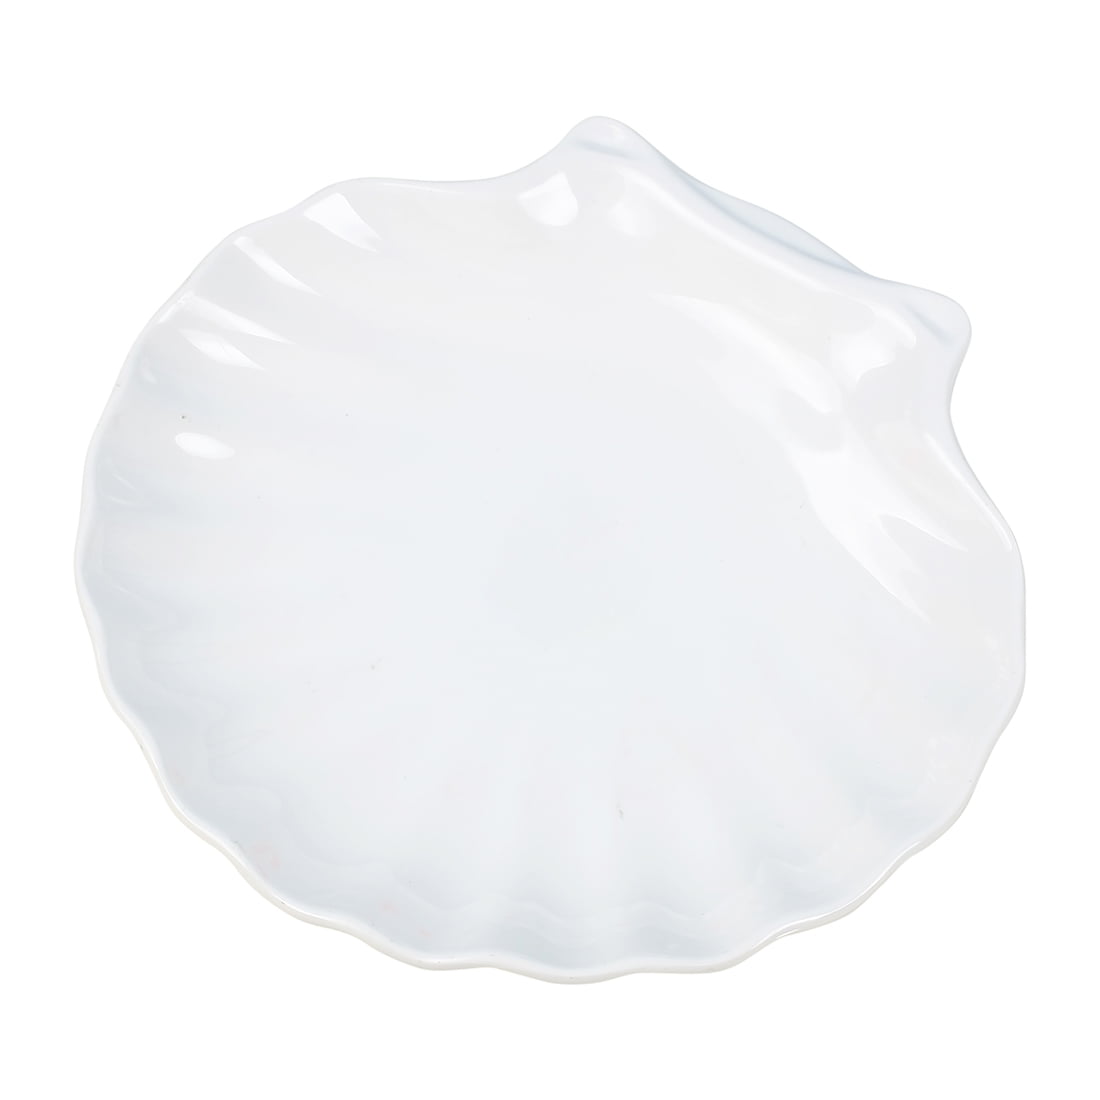 Details about   Tabletop WHITE SHELL SHAPE BOWL Ceramic Beach Ocean Clam 